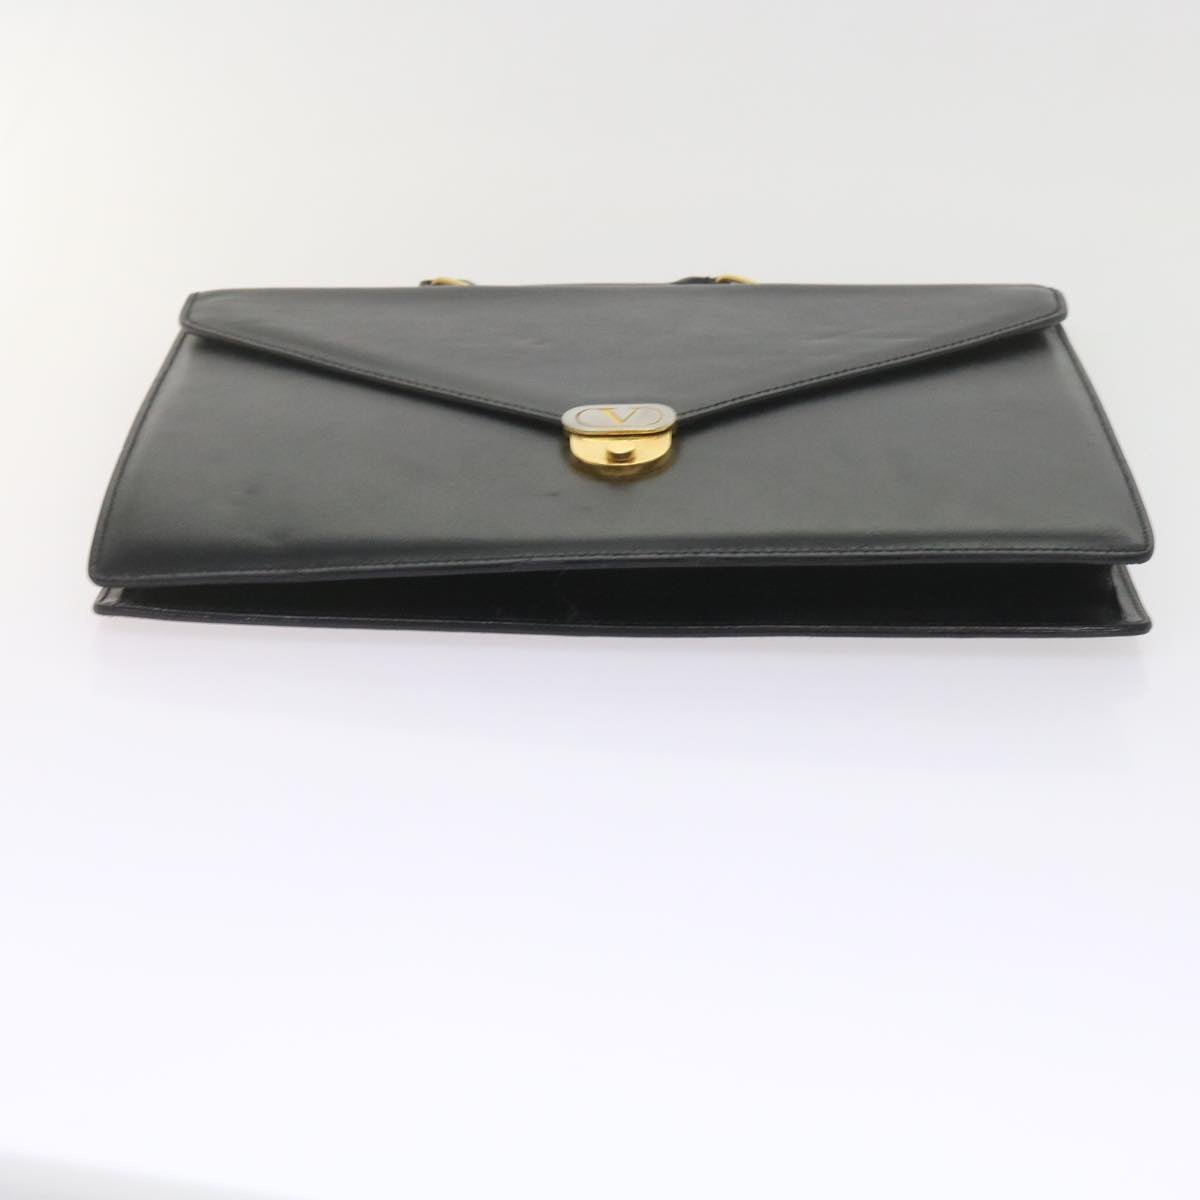 VALENTINO Business Bag Leather Black Auth bs10775